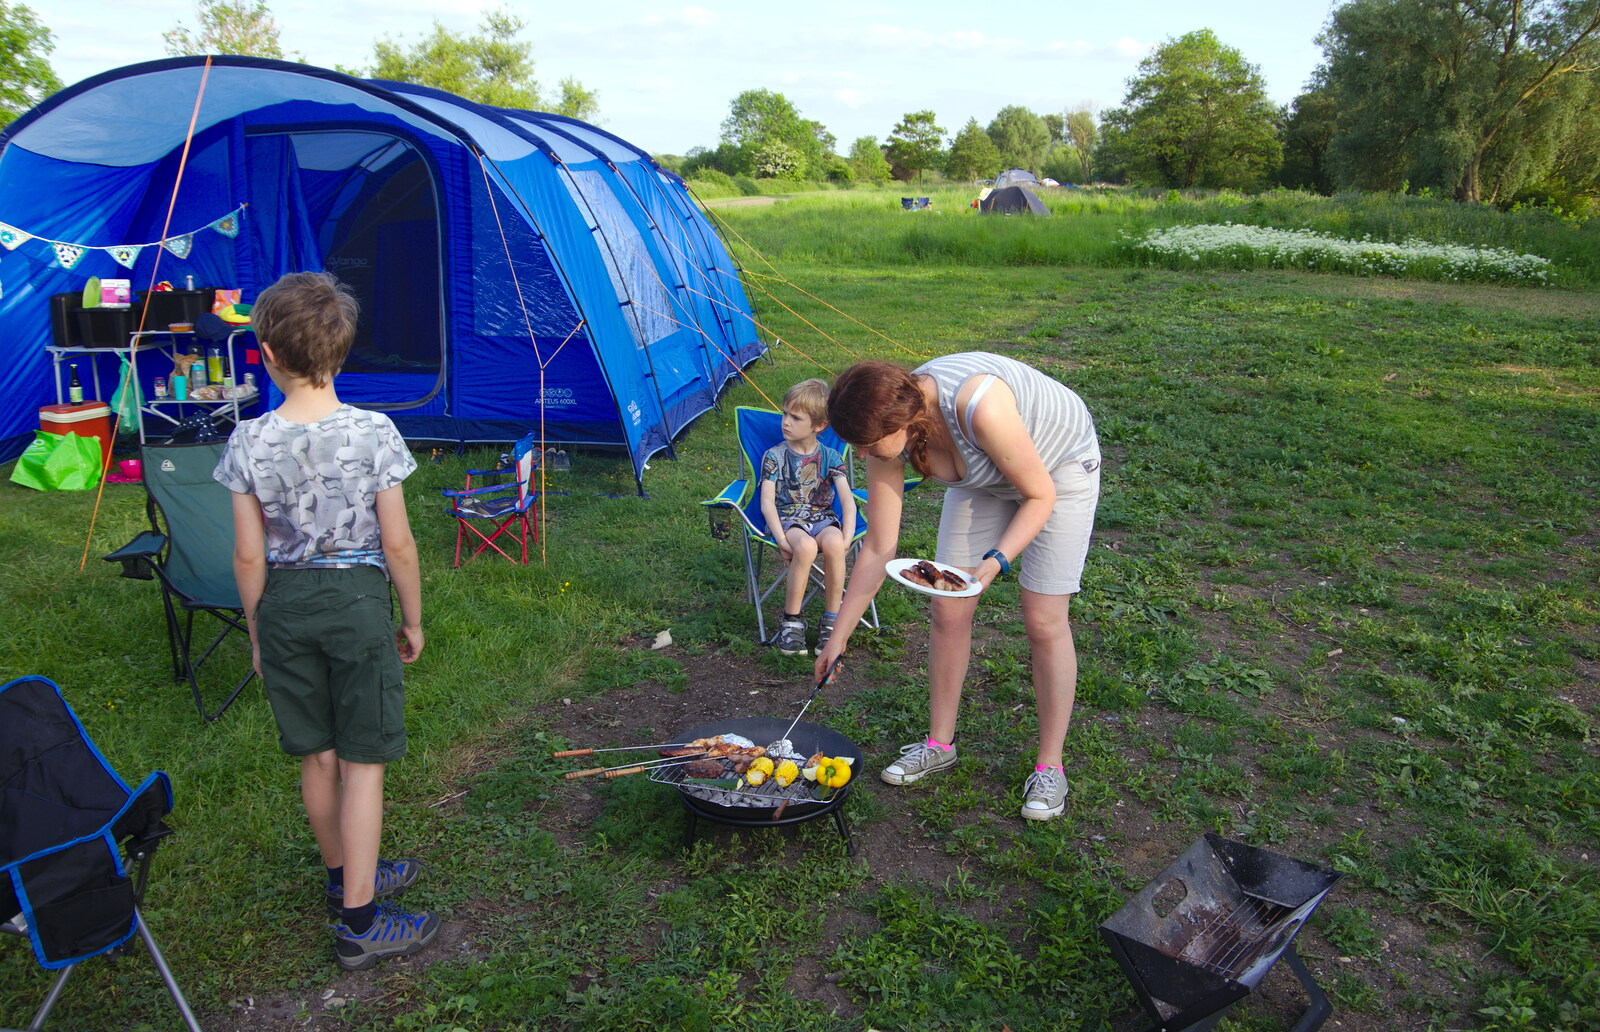 Isobel does some barbequeing from Camping at Three Rivers, Geldeston, Norfolk - 1st June 2019